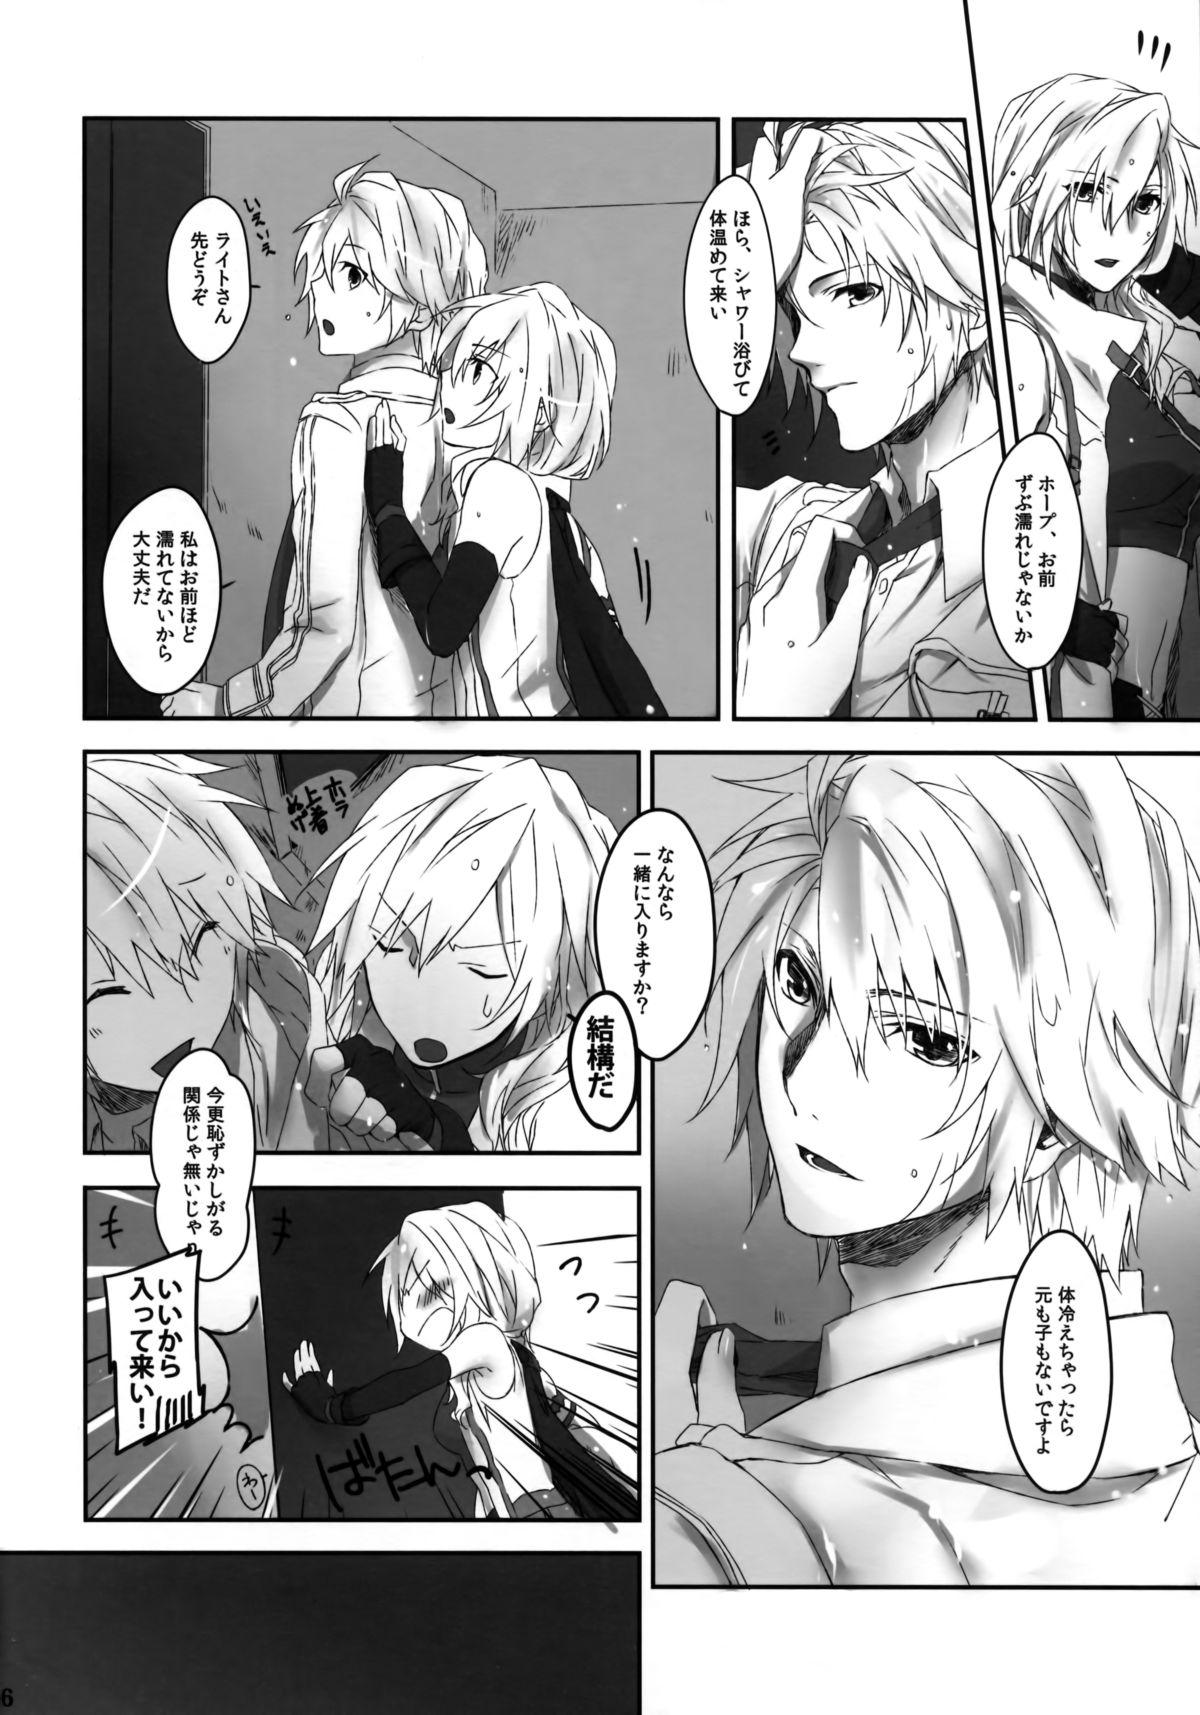 Relax Amayo no Hoshi - Final fantasy xiii Story - Page 6